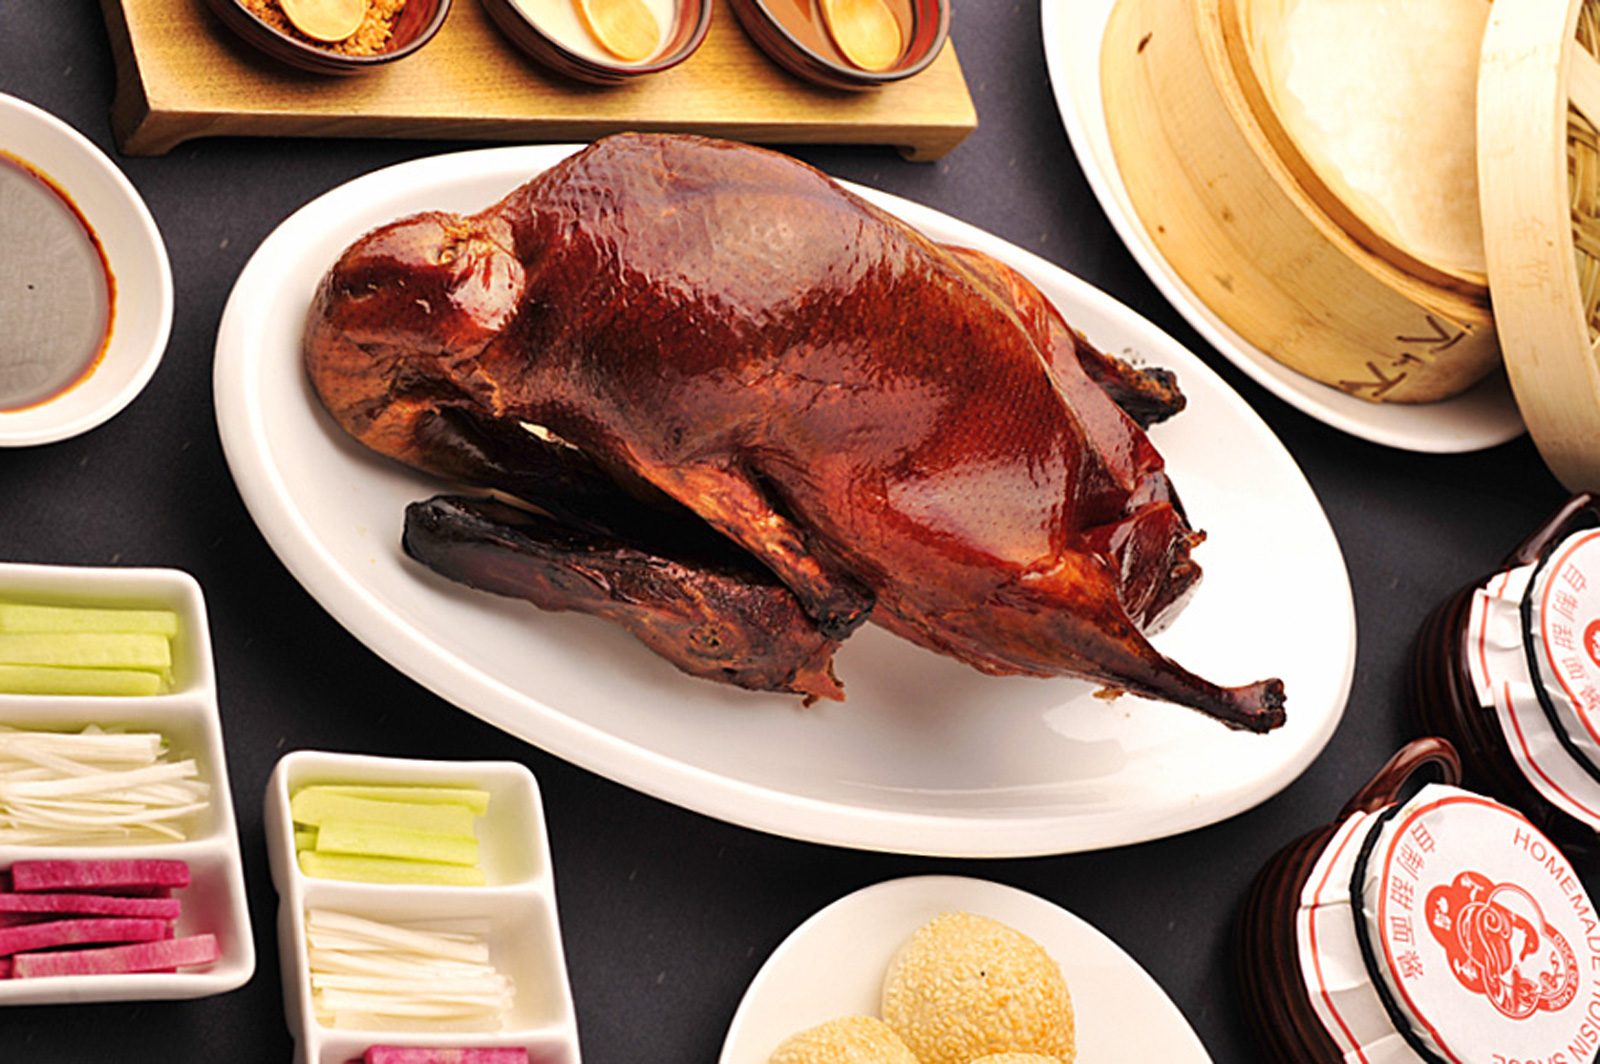 Order Chinese Food to Know What Your Fortune Cookie Says Quiz Peking roasted duck